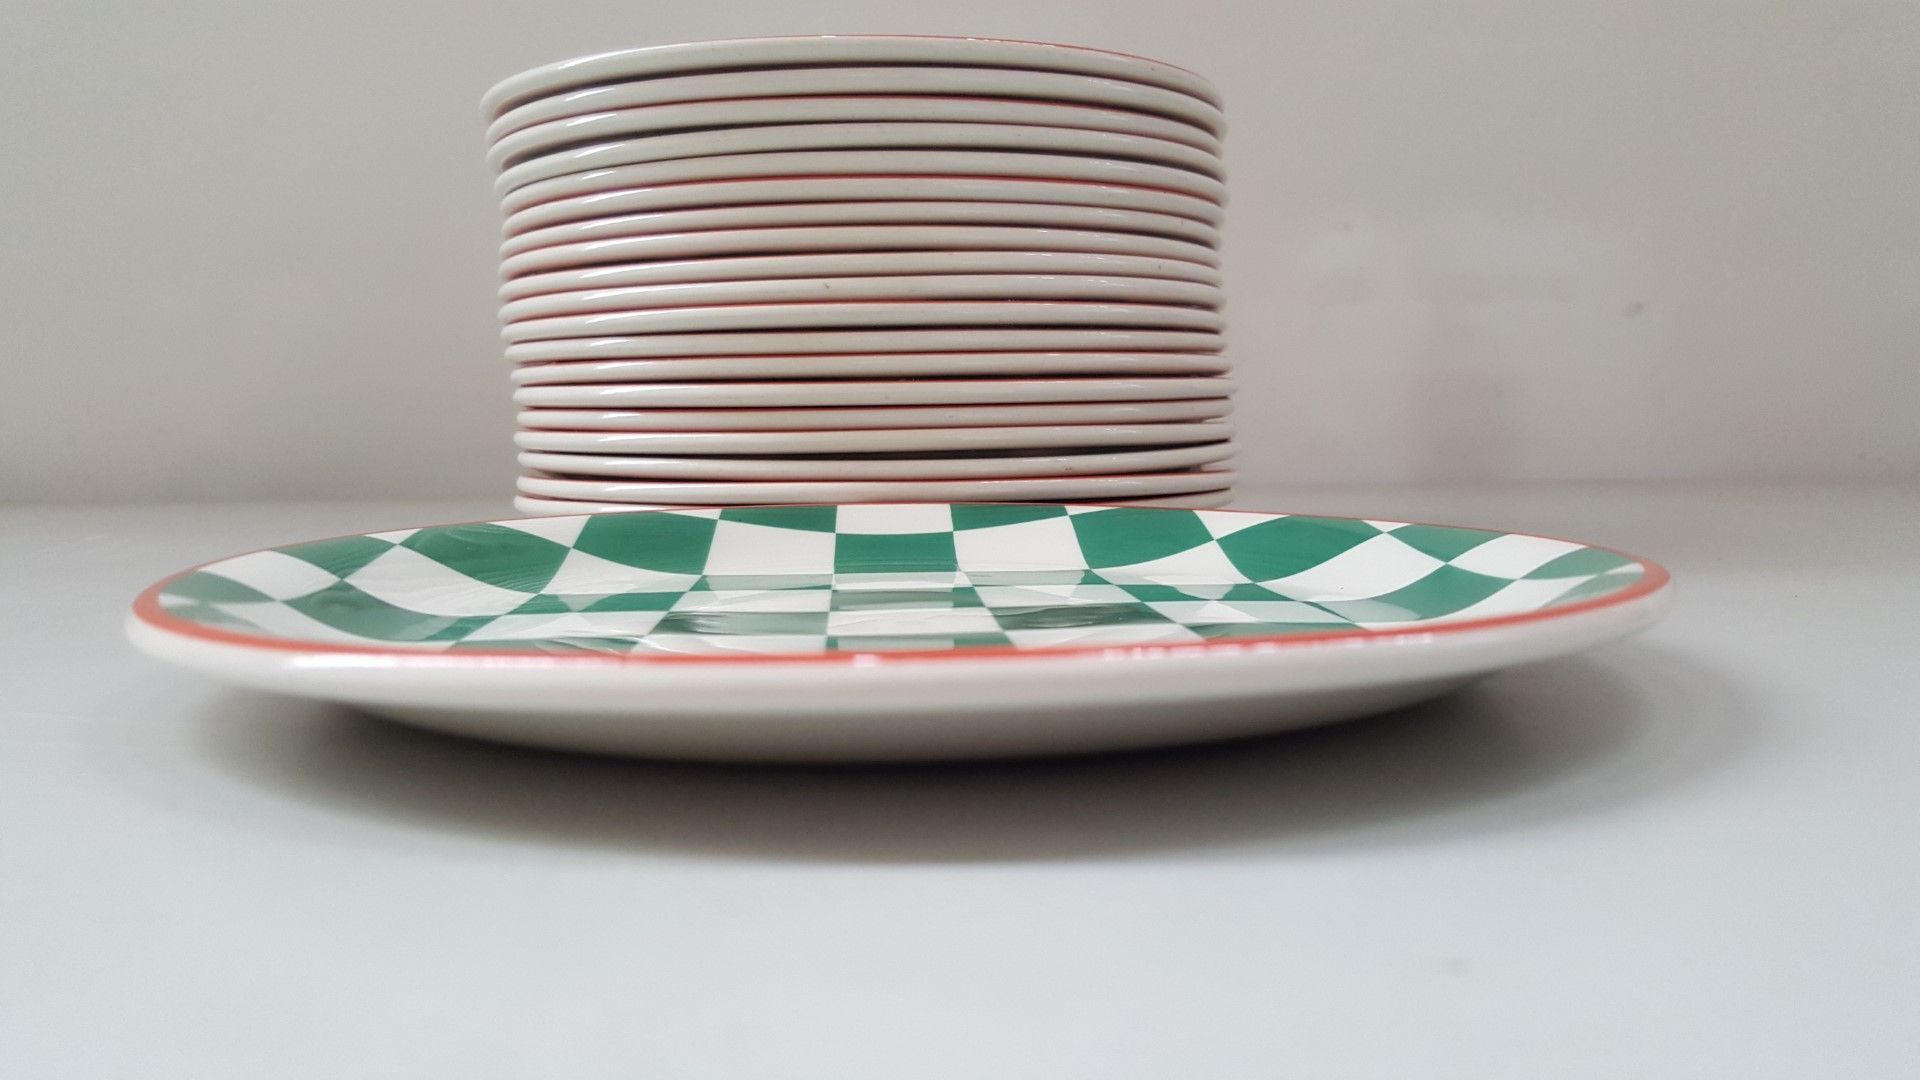 20 x Steelite Plates Checkered Green&White With Red Outline 20CM - Ref CQ284 - Image 4 of 4